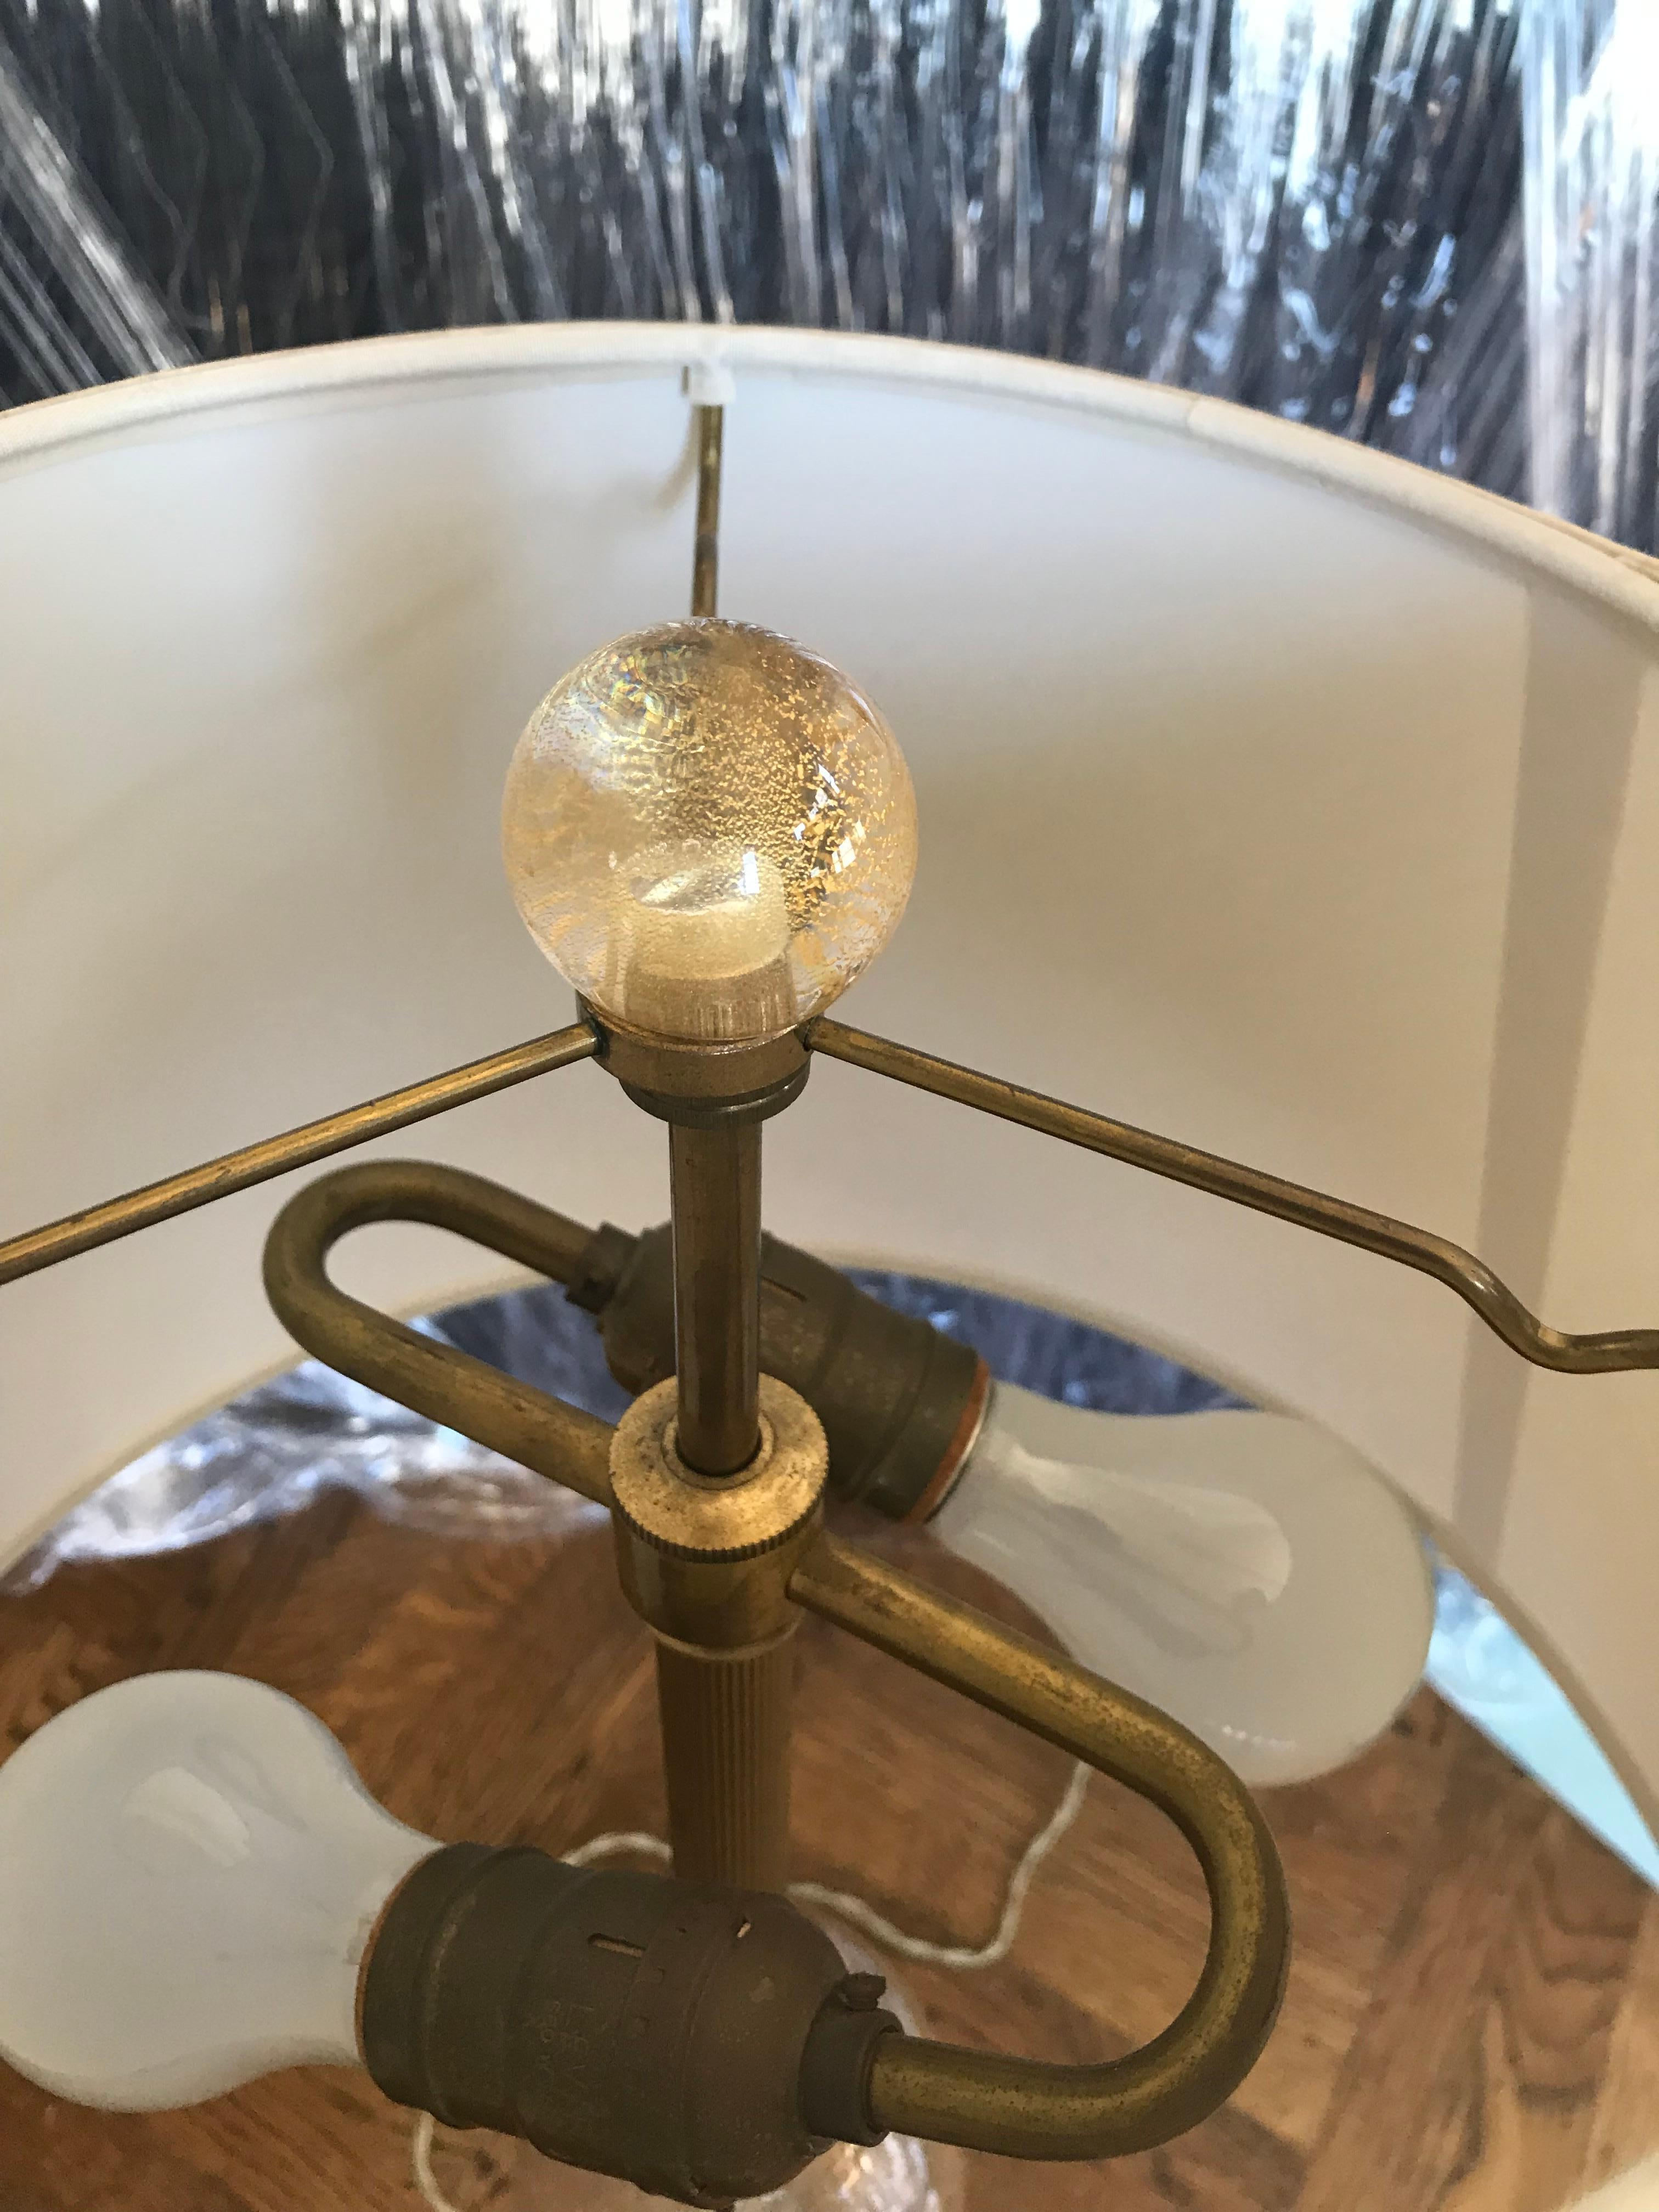 Murano Glass Donghia Lamp with Custom Shade In Good Condition For Sale In Larkspur, CA